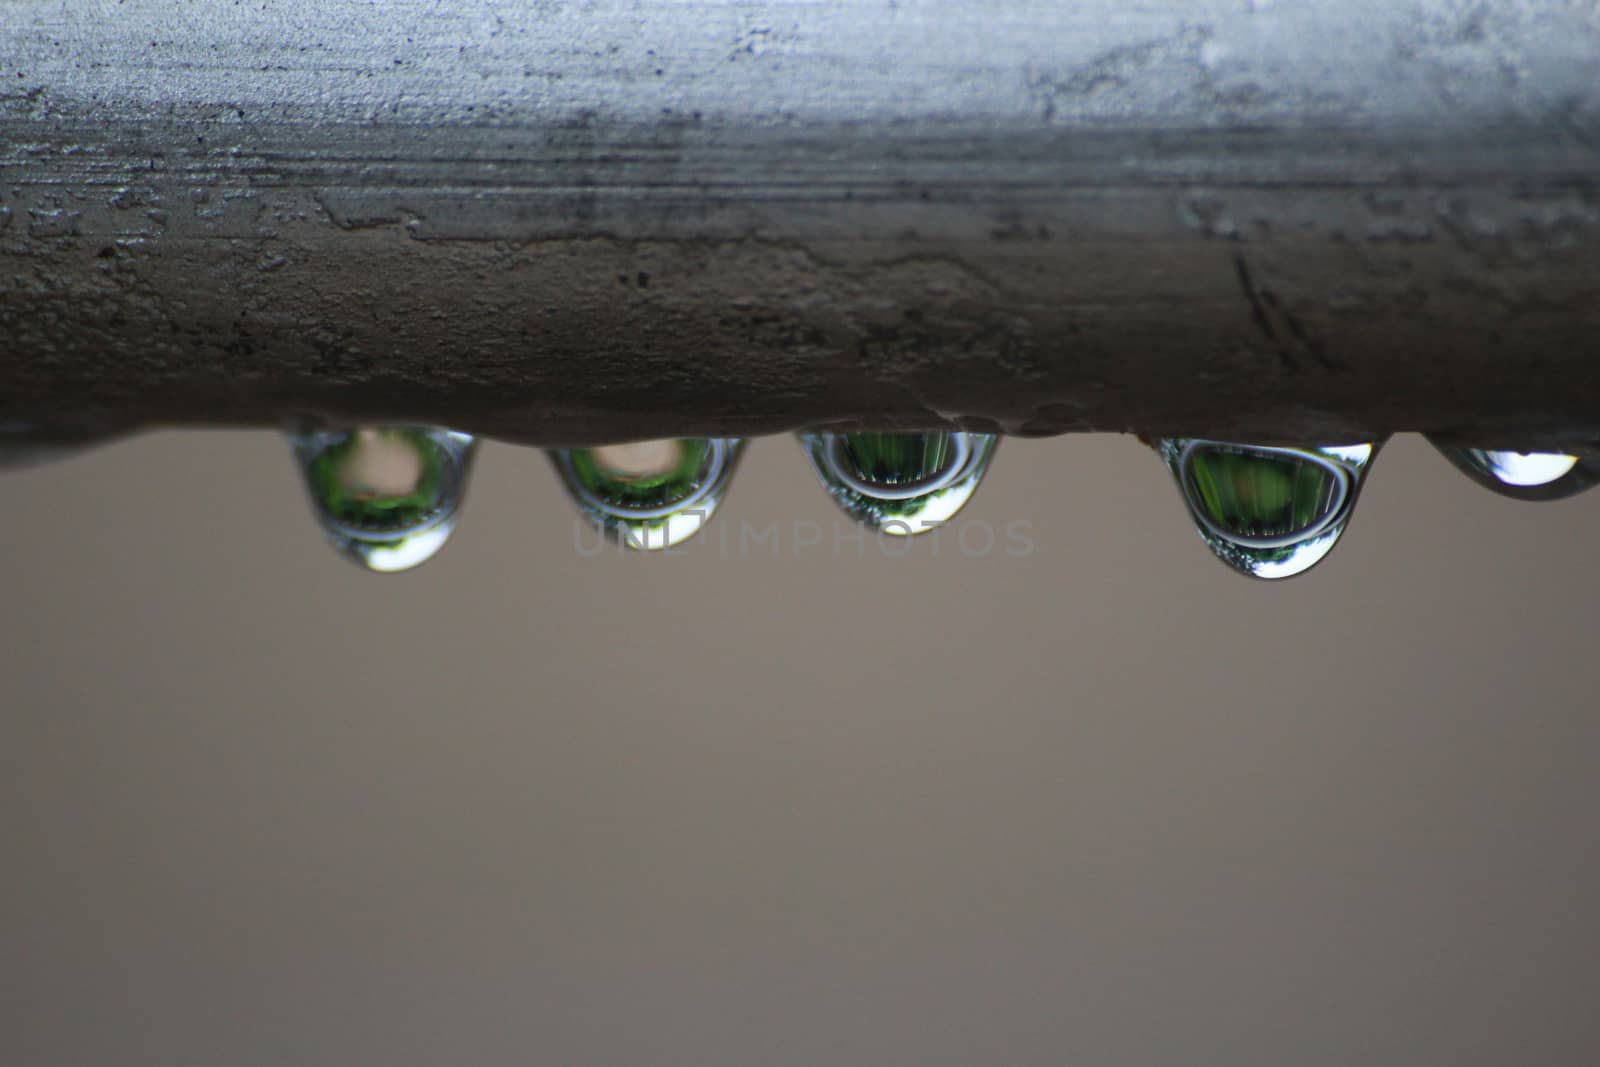 drops from steel pipe by kaidevil